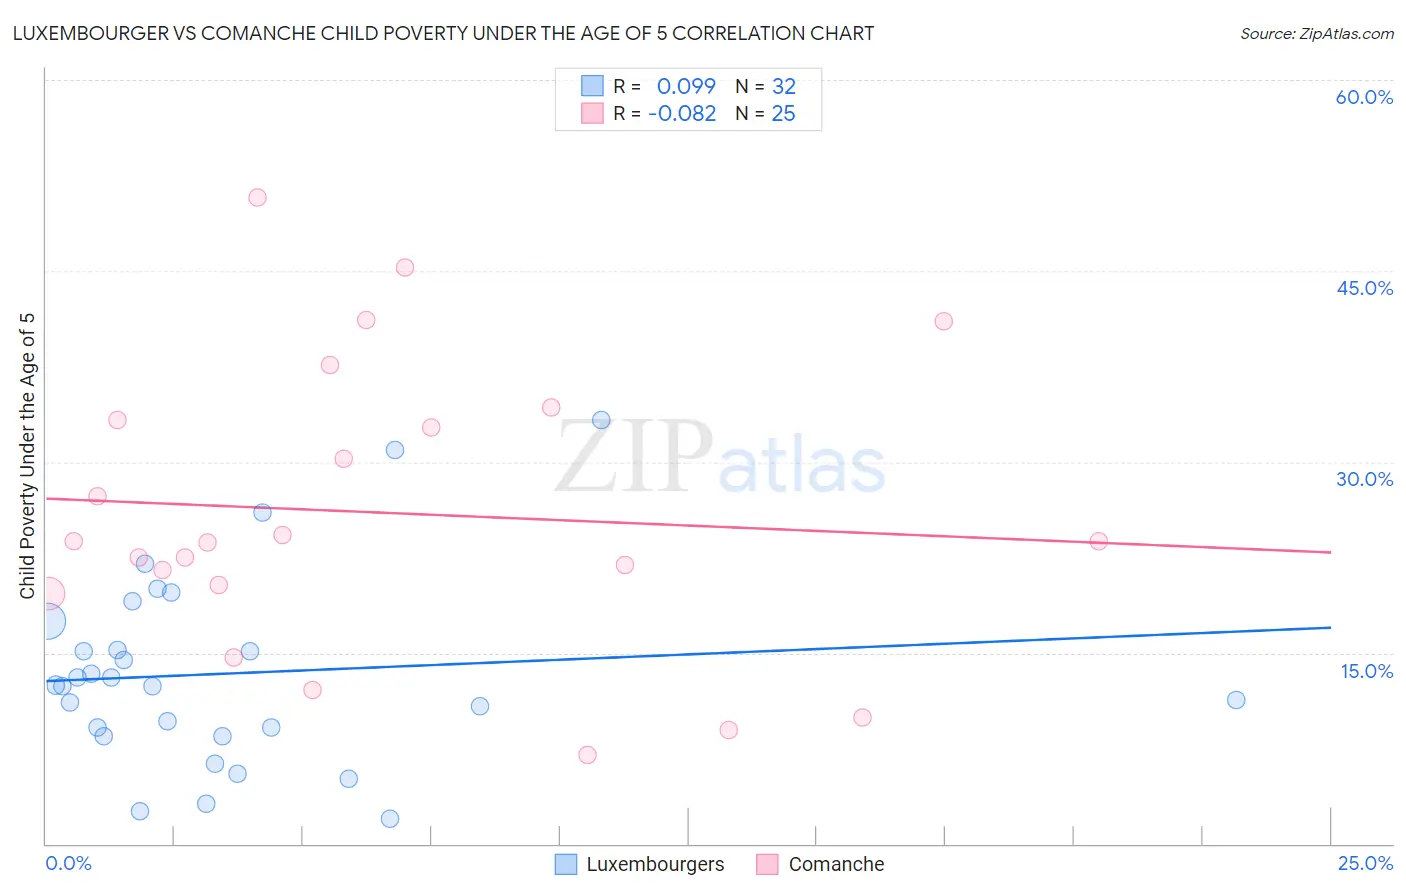 Luxembourger vs Comanche Child Poverty Under the Age of 5